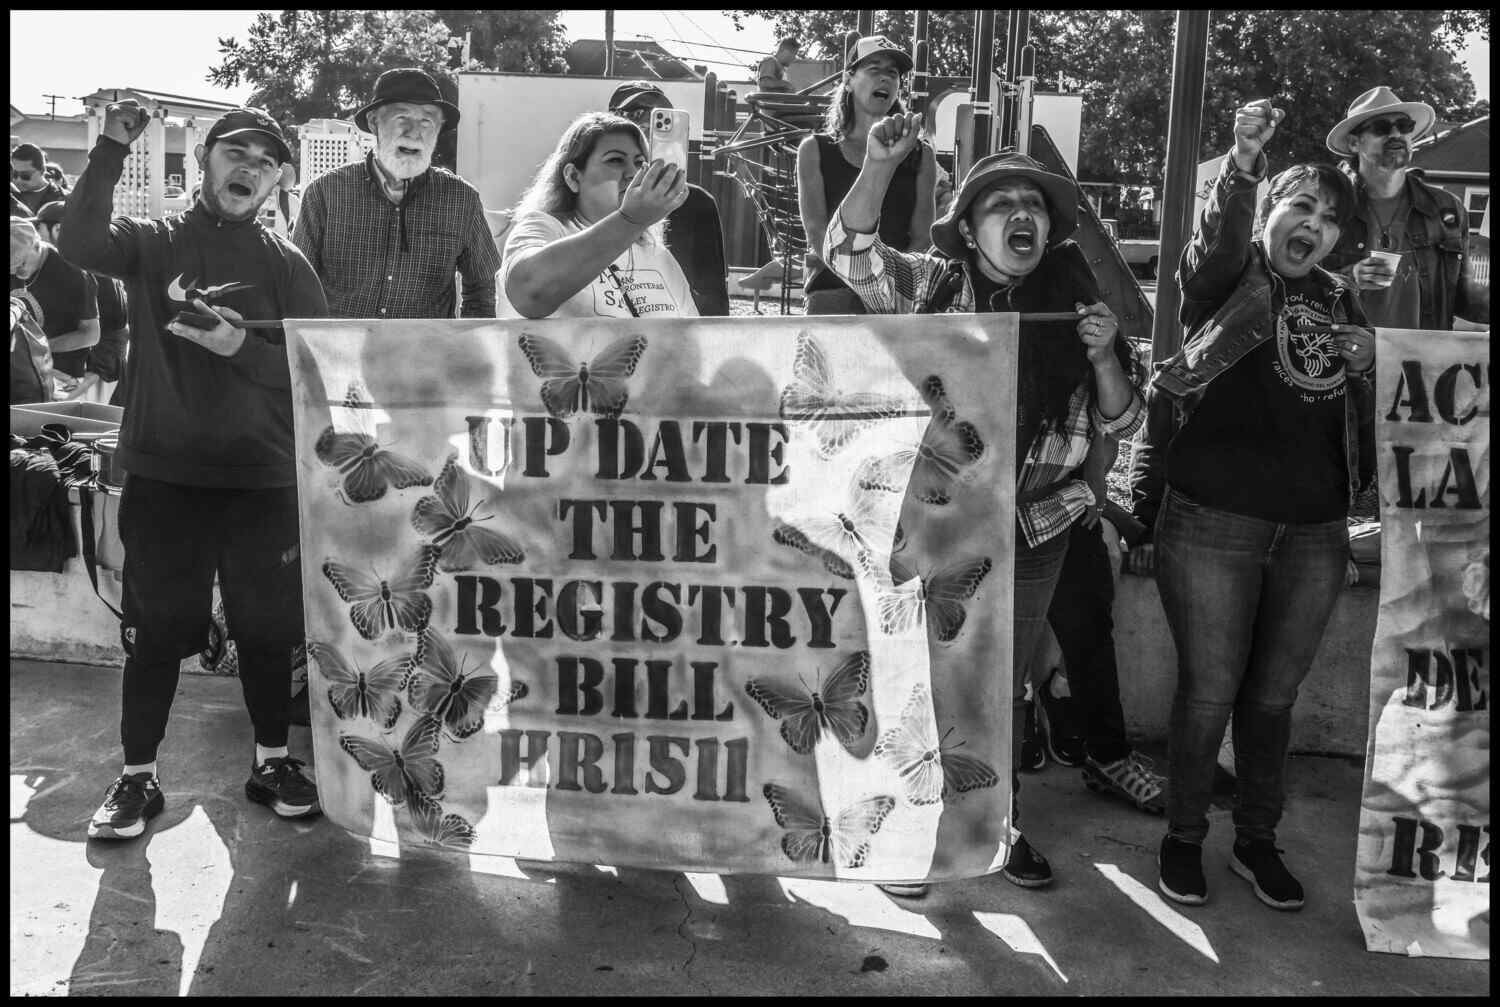 Farmworkers march in support of the Registry Bill in California